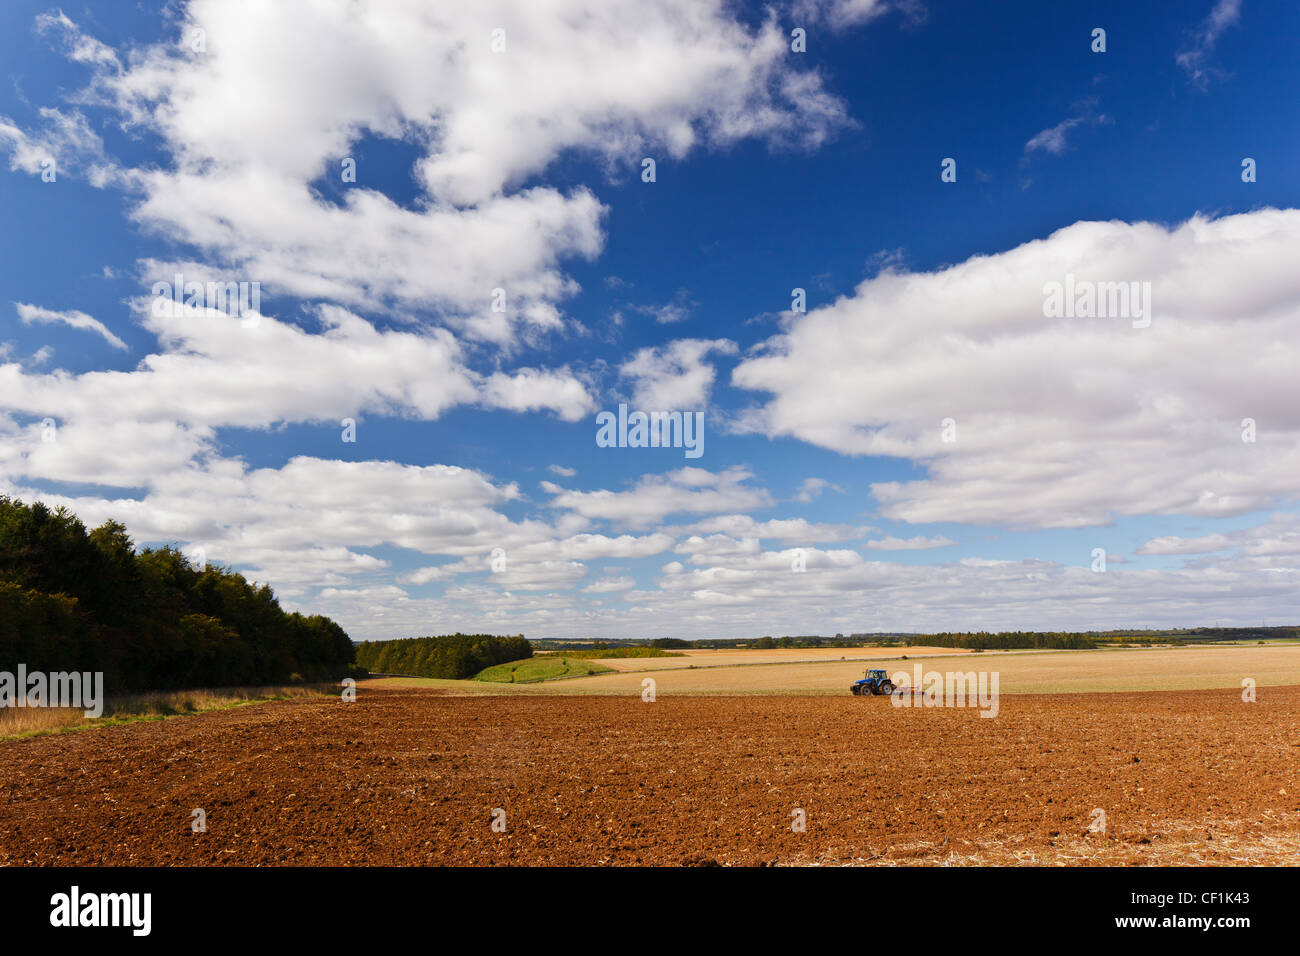 Tractor ploughing a large field in the countryside near Cirencester. Stock Photo